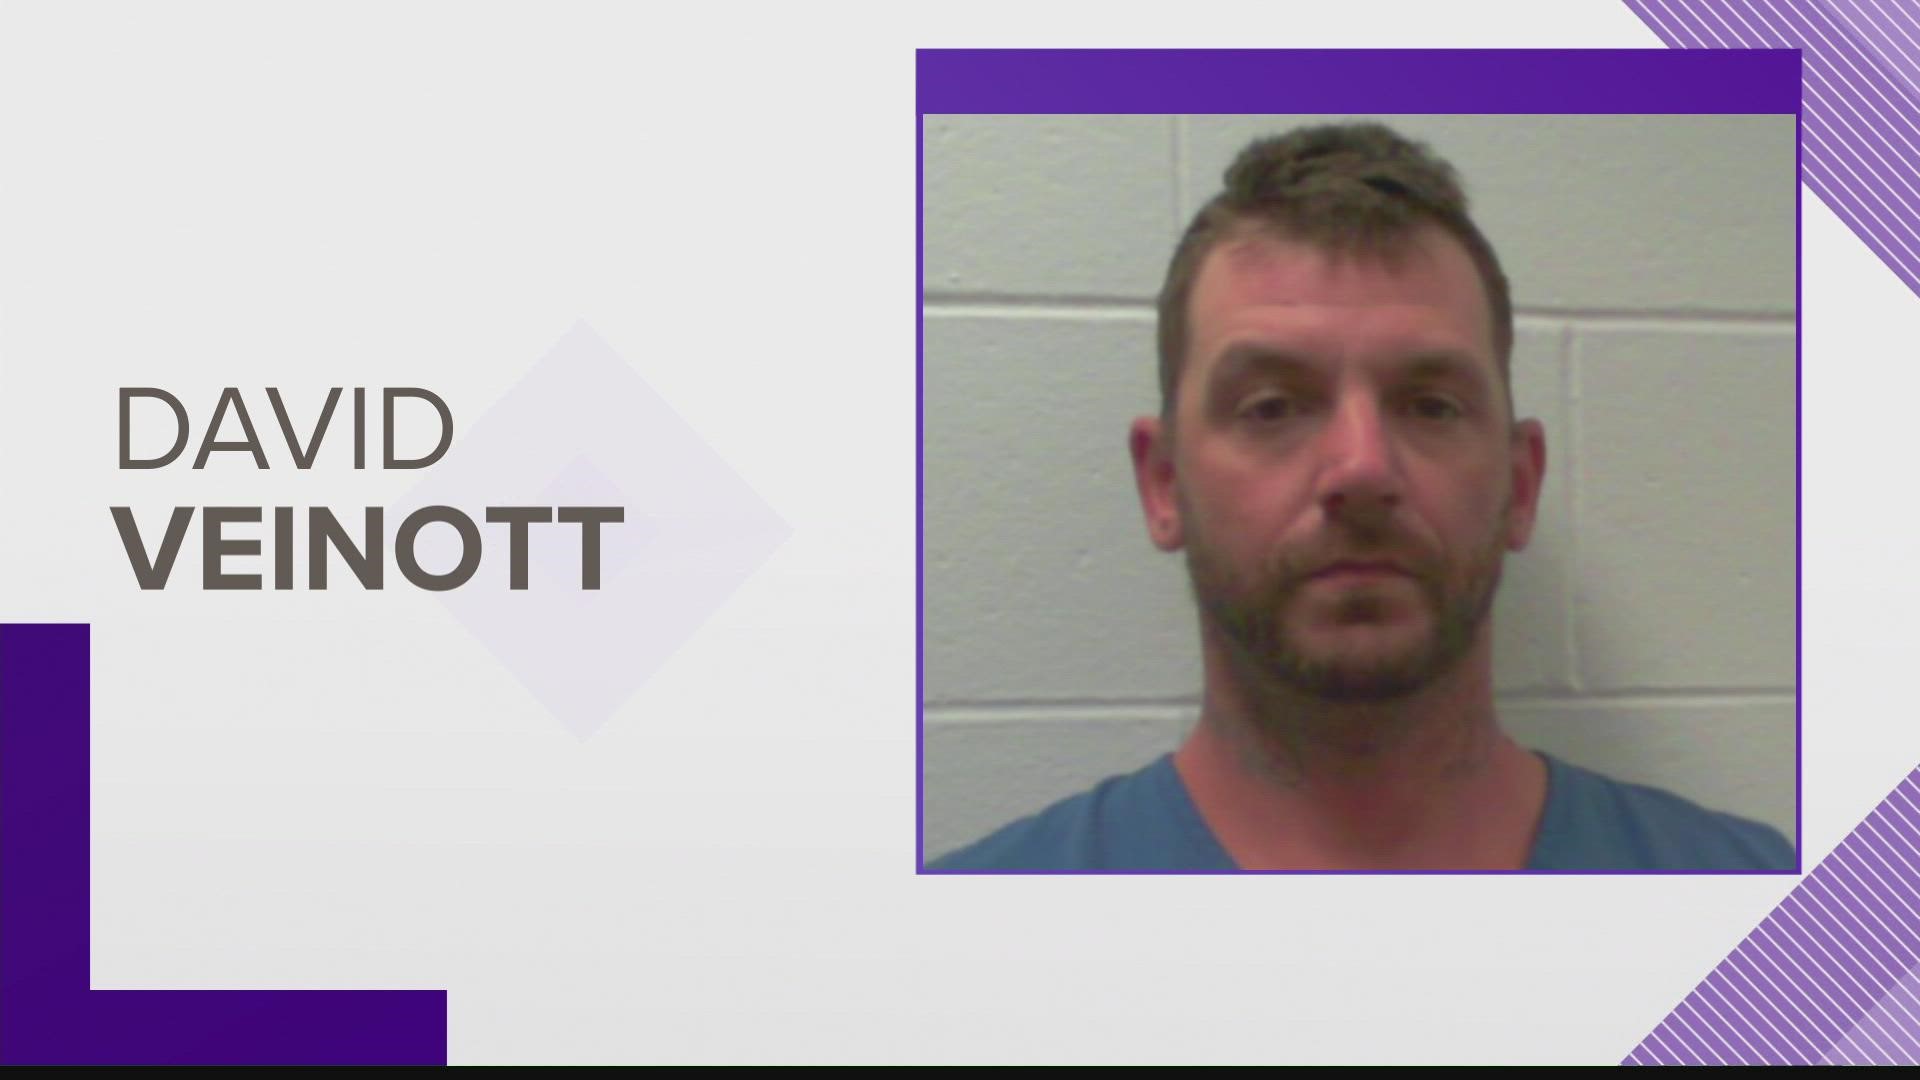 According to police, David Veinott was charged with leaving the scene of a crash resulting in death.